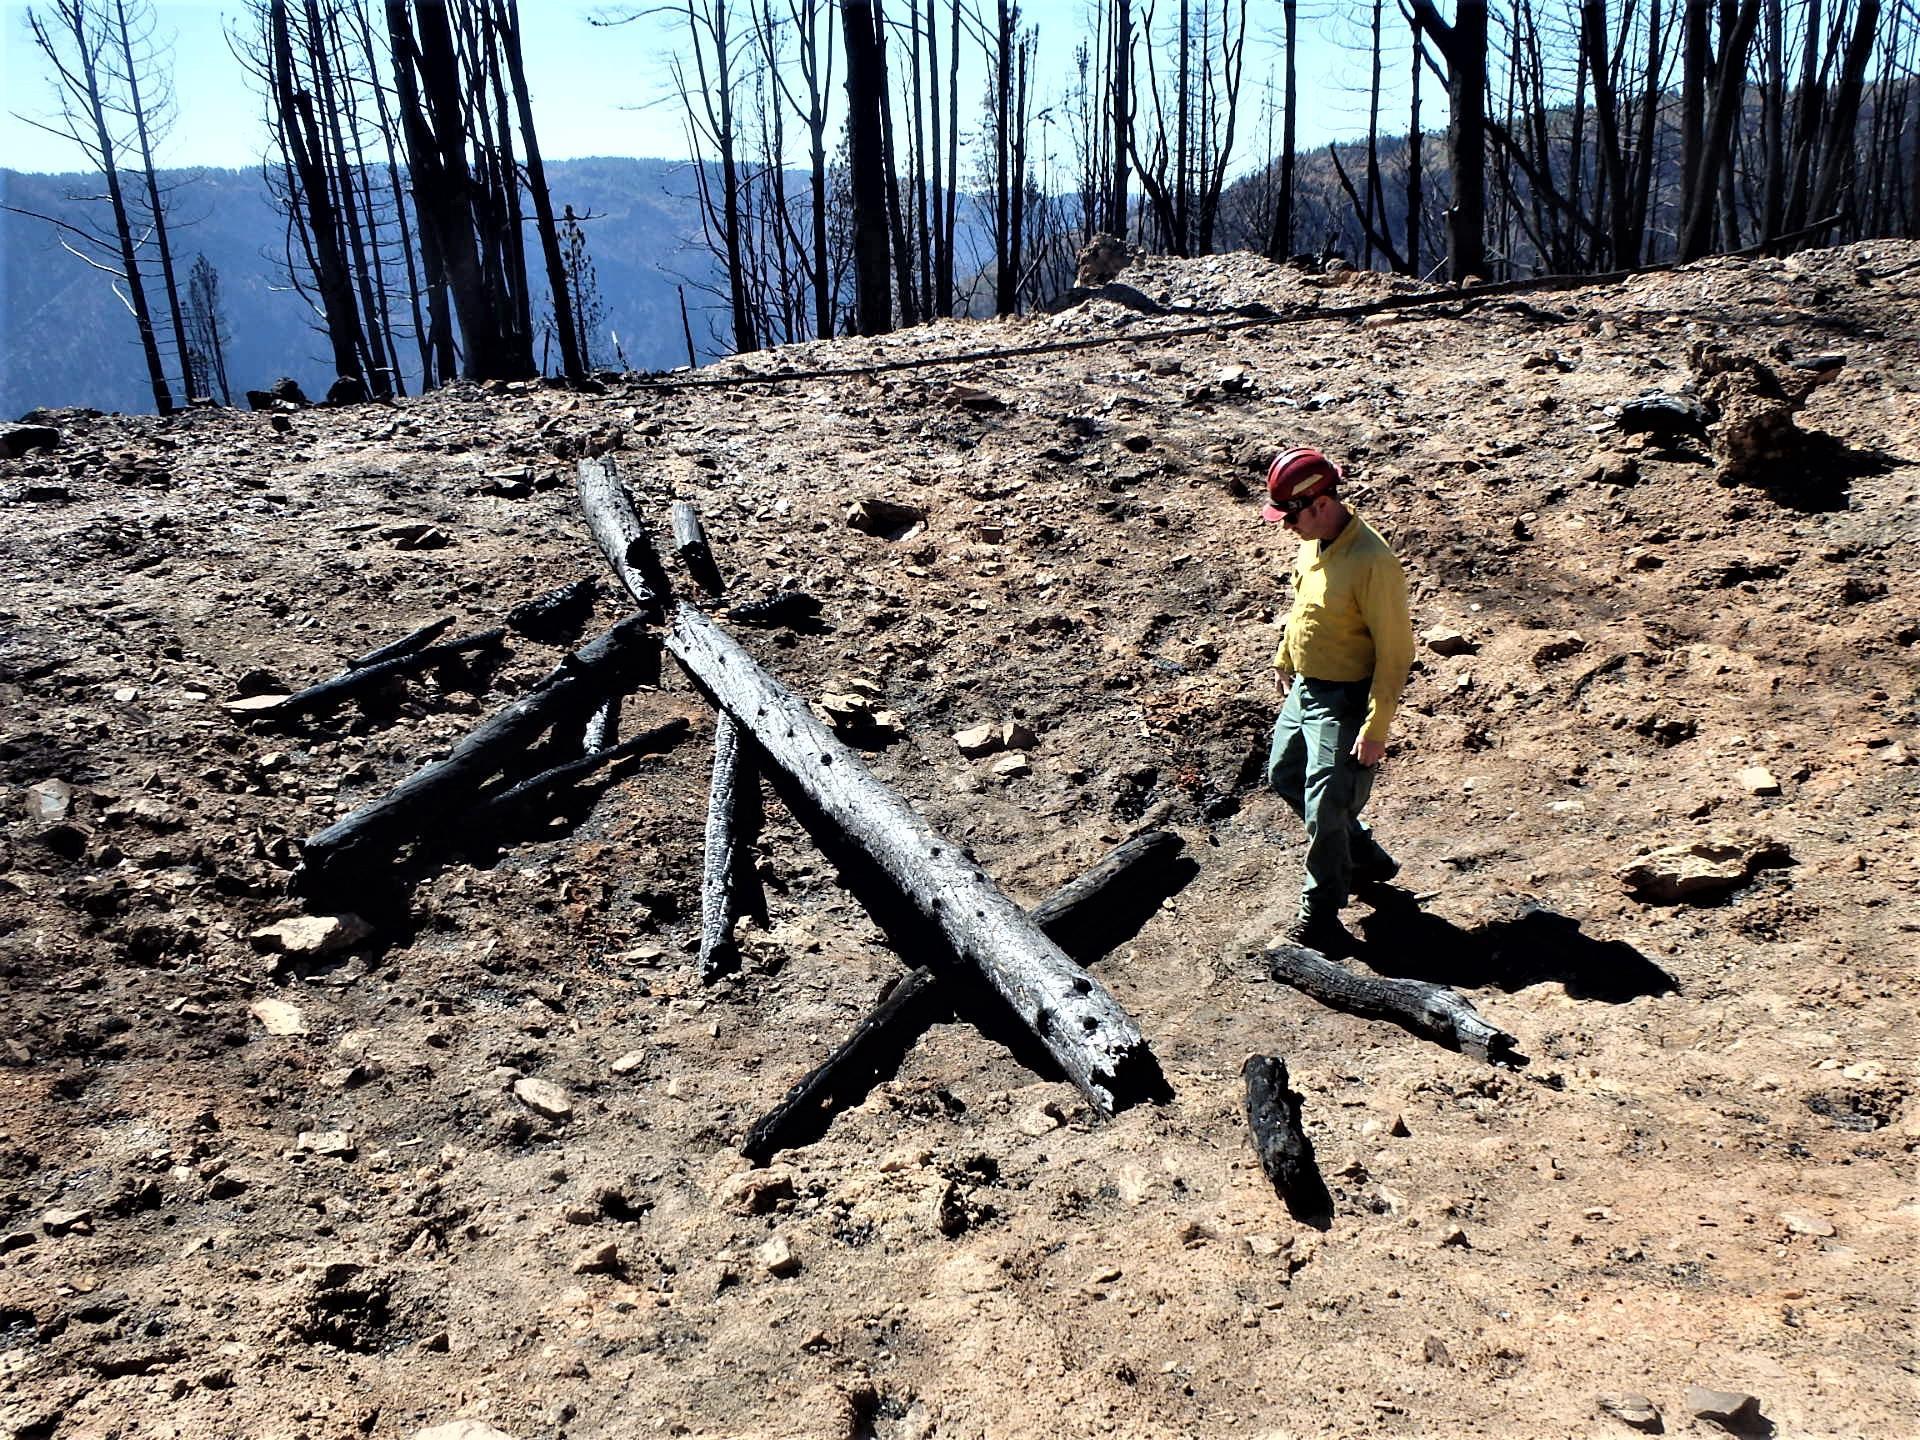 Image showing BAER Aquatics Biologist Dan Teater, Fisheries Biologist assessing California red legged frog critical habitat that was burned over by the Mosquito Fire